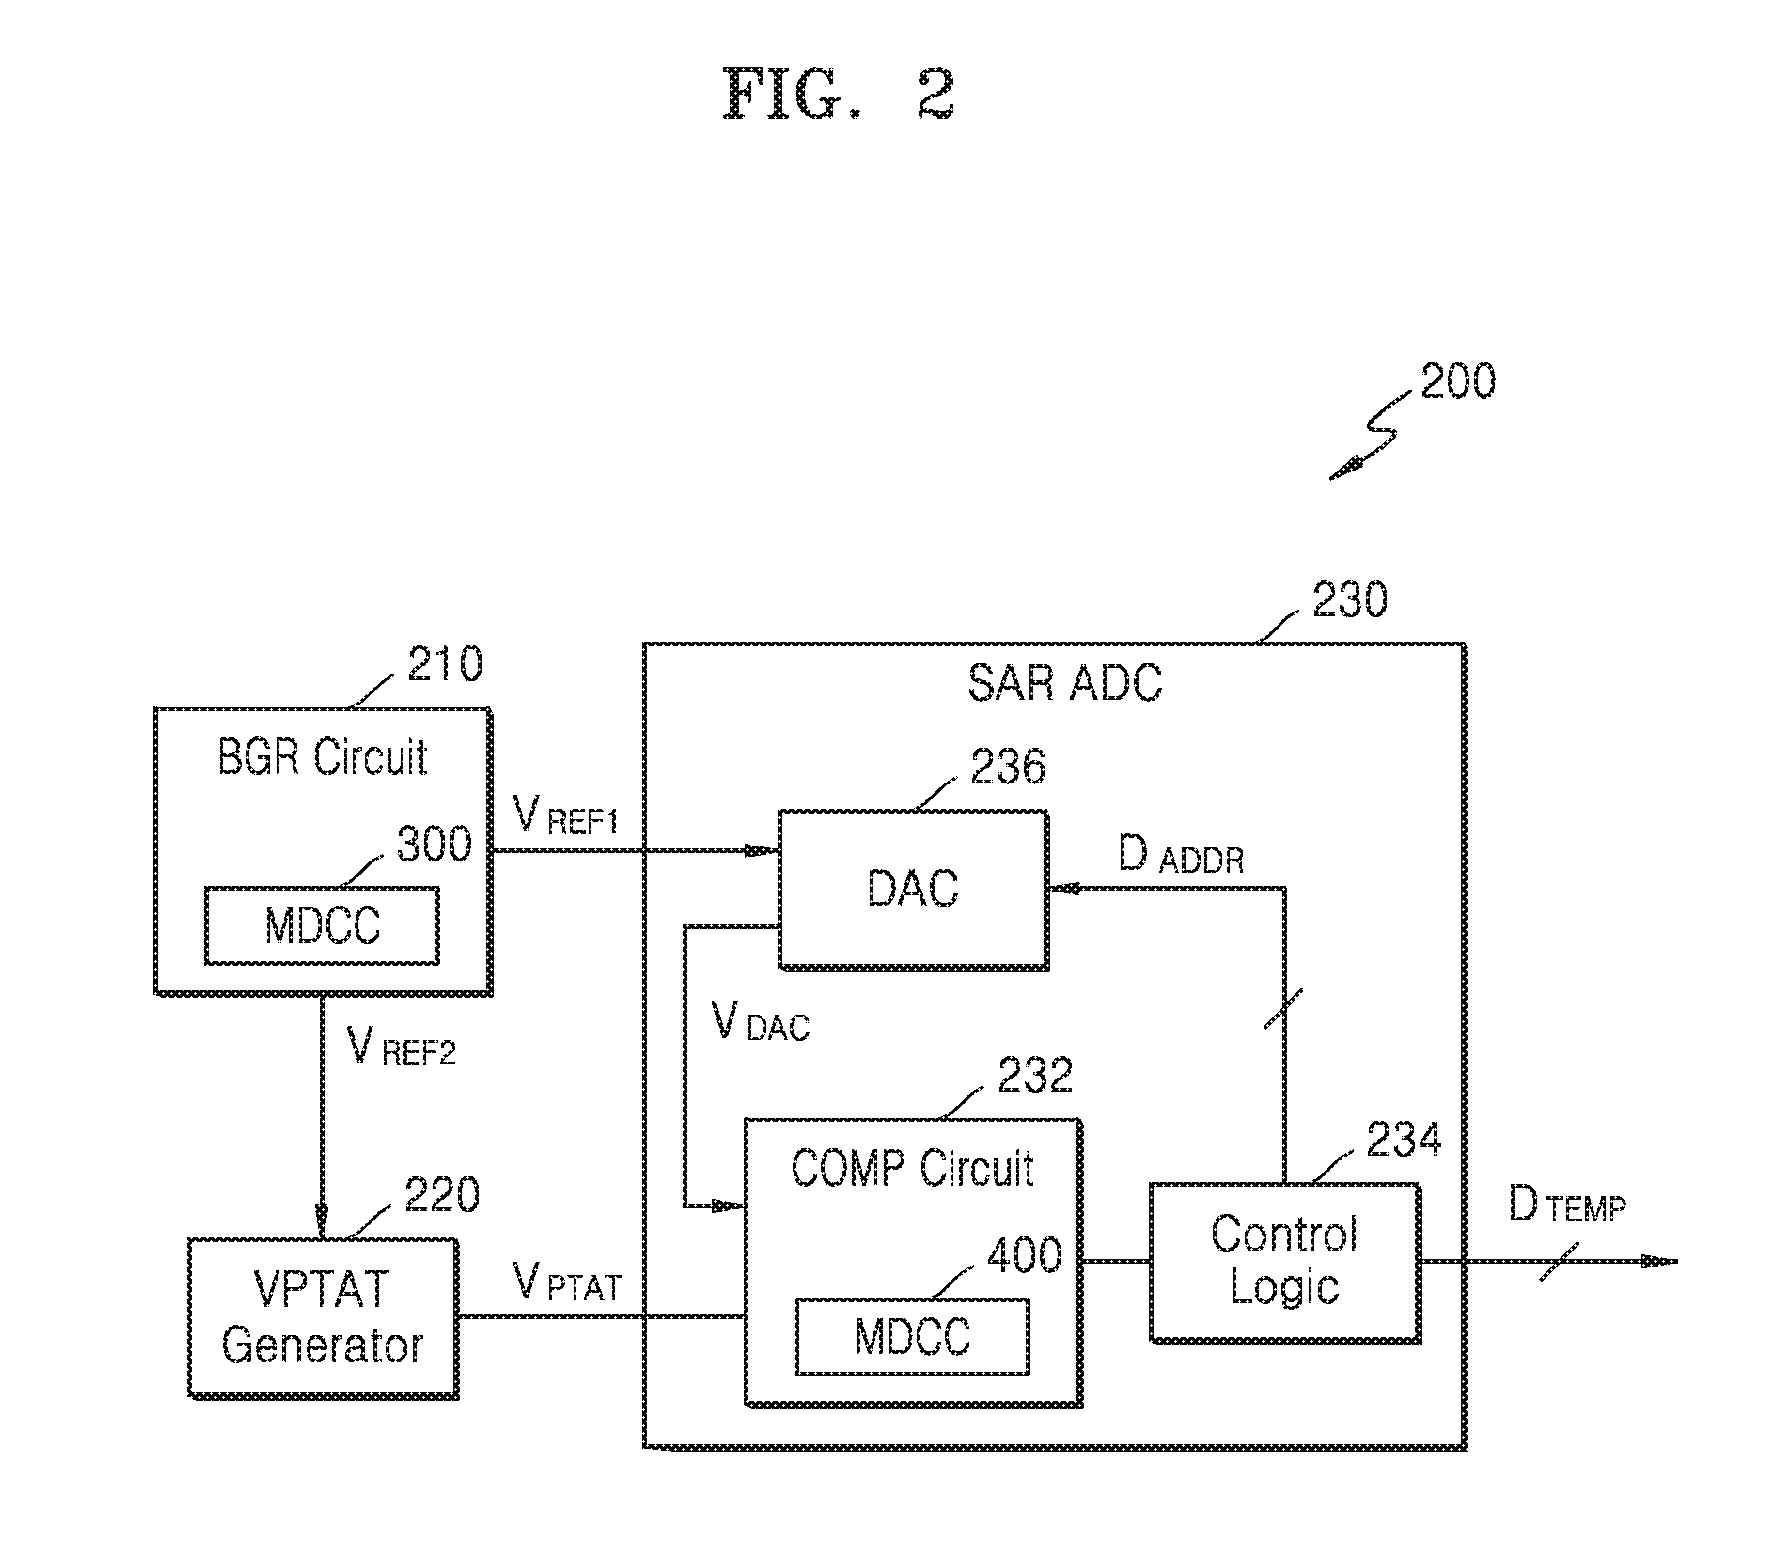 Semiconductor device having a mismatch detection and correction circuit